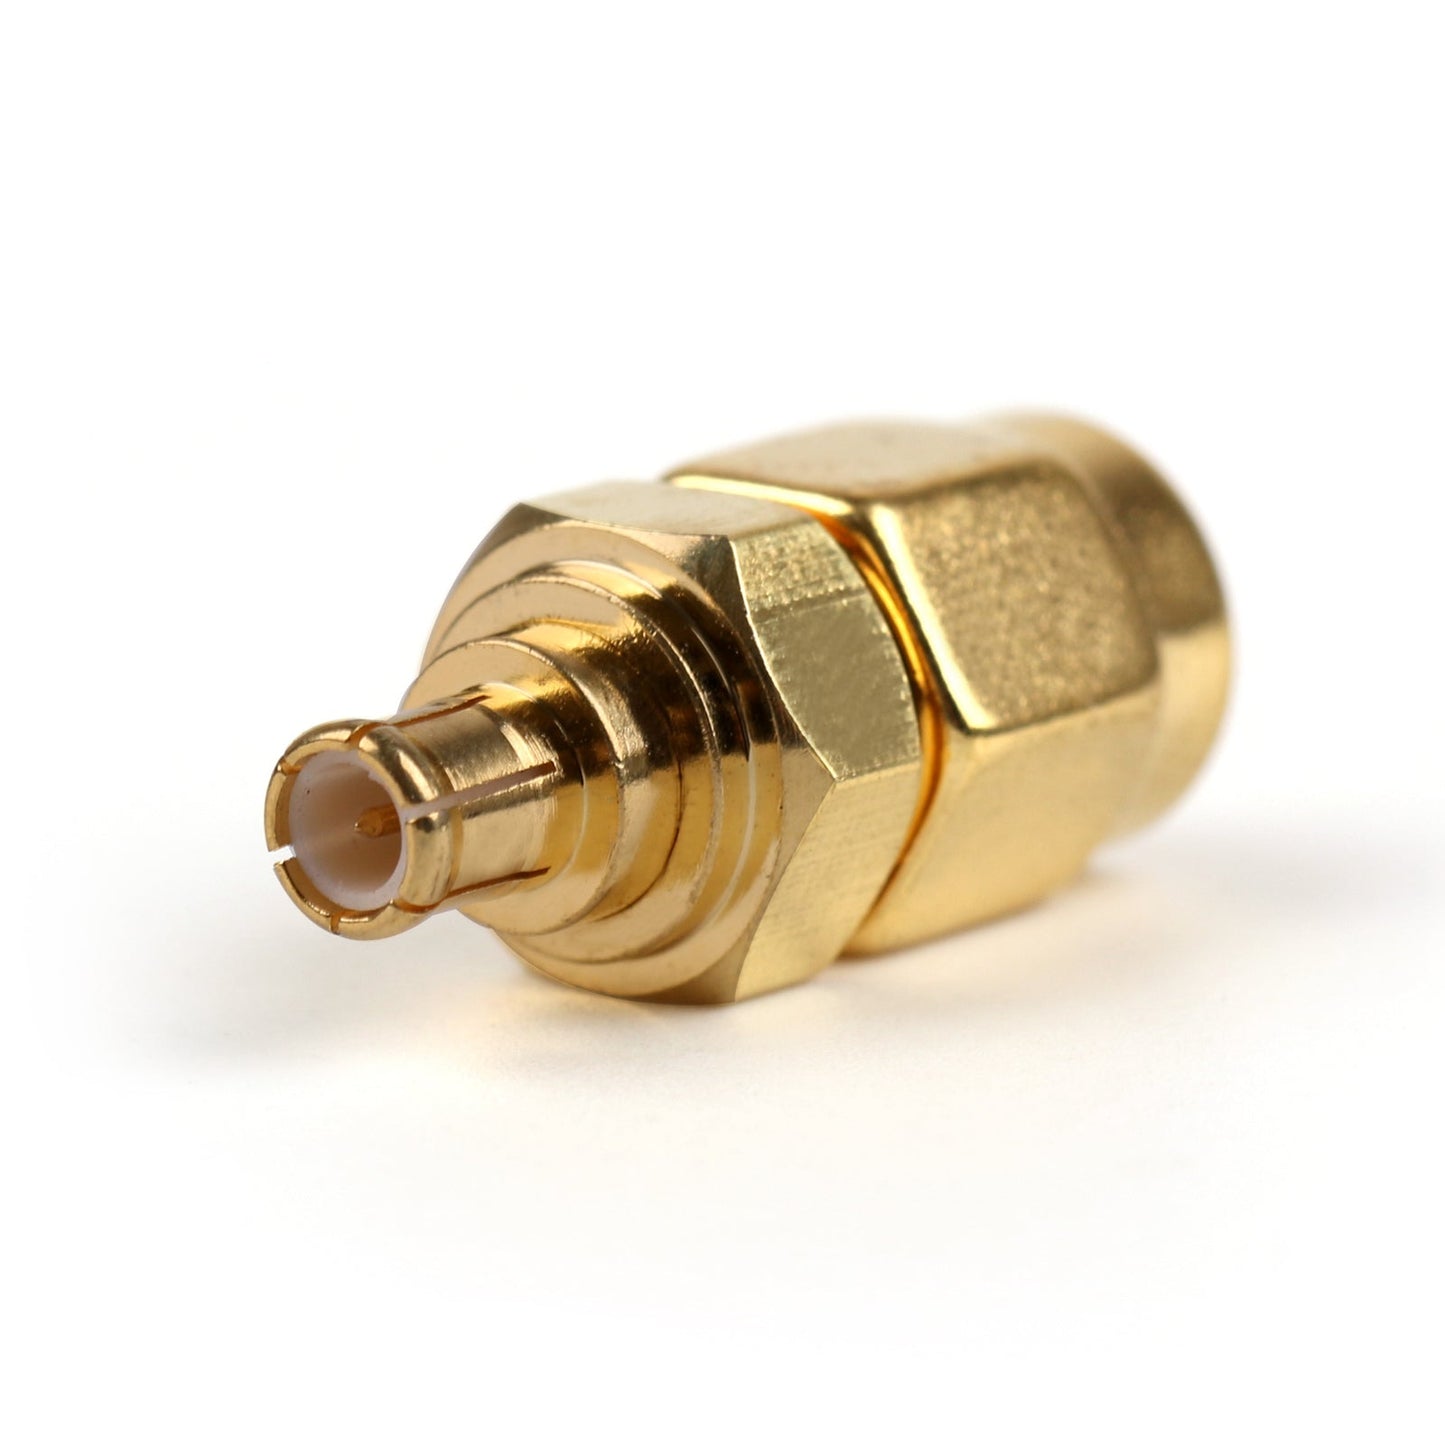 10x RF Adapter SMA Male Plug to MCX Male Gold-Plated RF Coax Adapter Connector